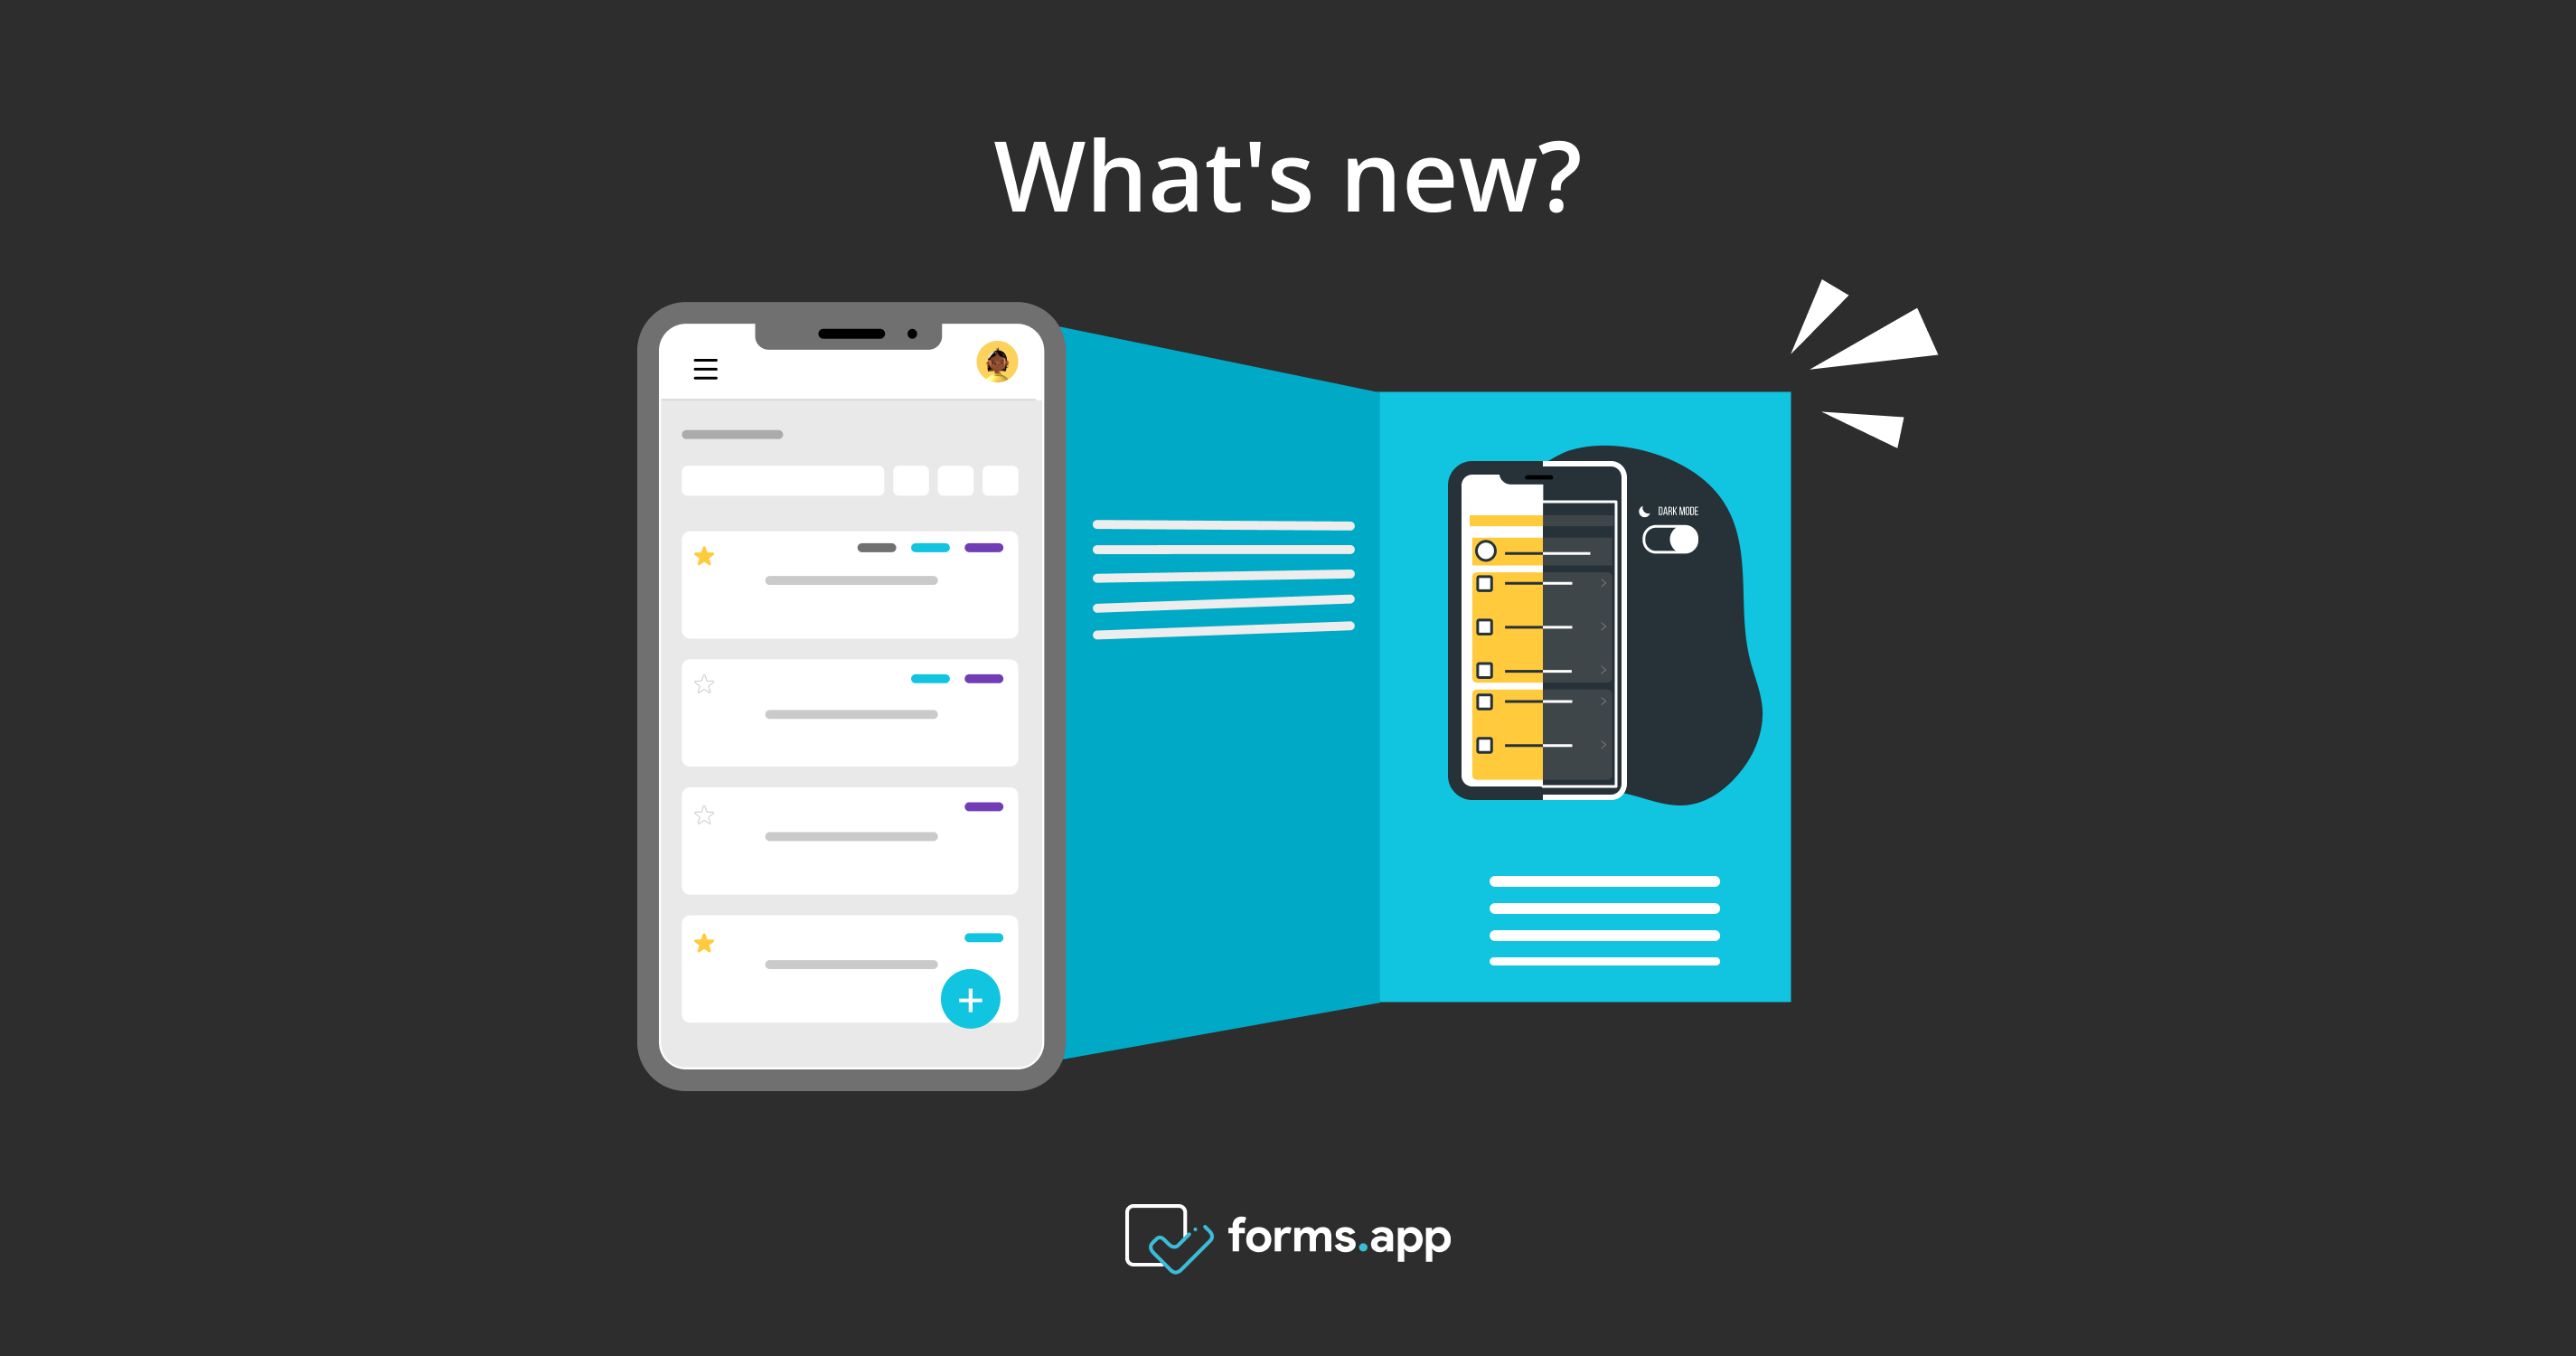 What's new - Learn about the recent changes to forms.app